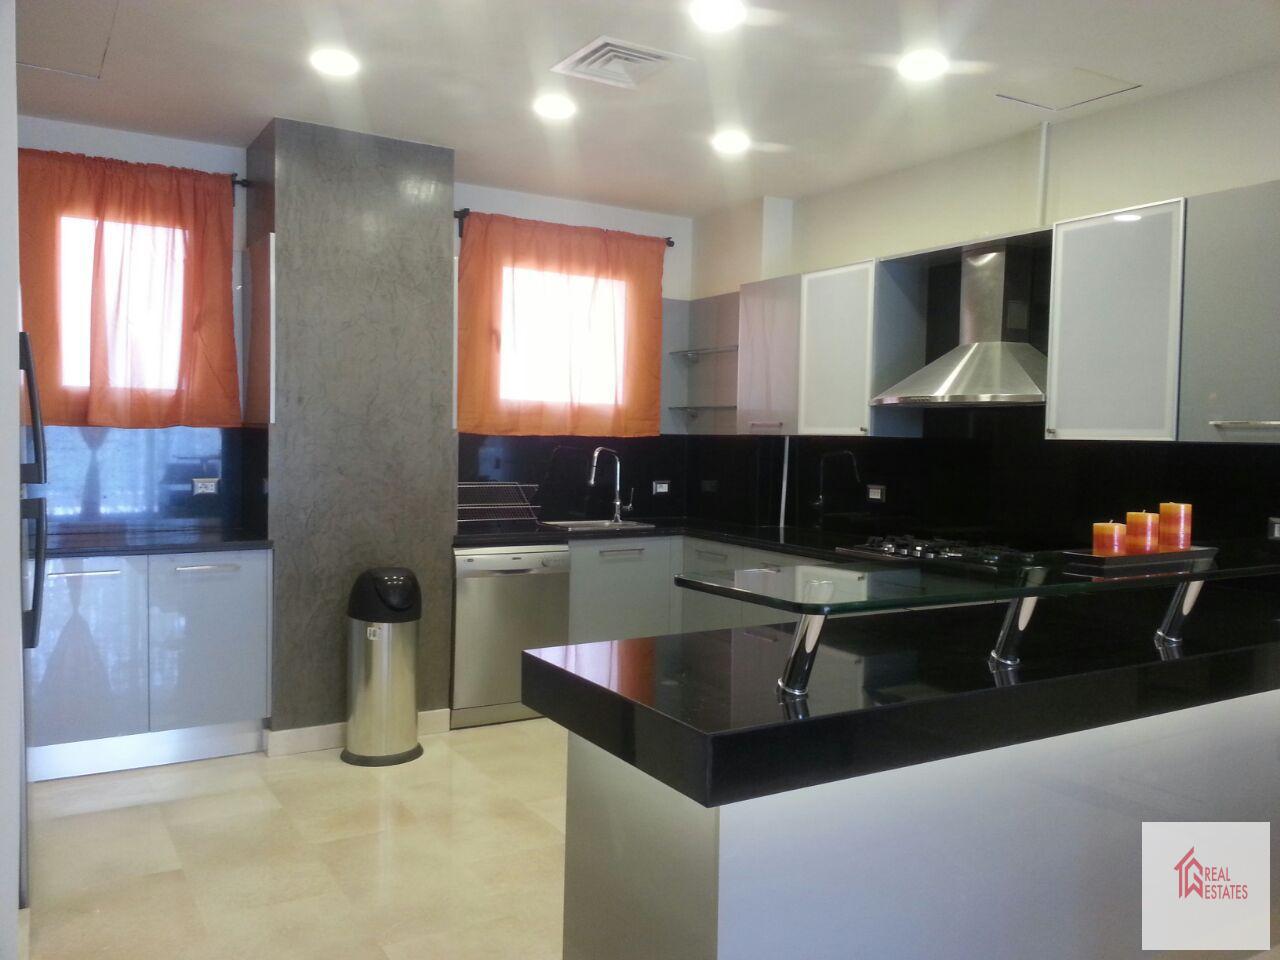 Rent 3500$ Sale 900,000$ Apartment for rent or sale in apartment buildings inside katameya heights next to club house